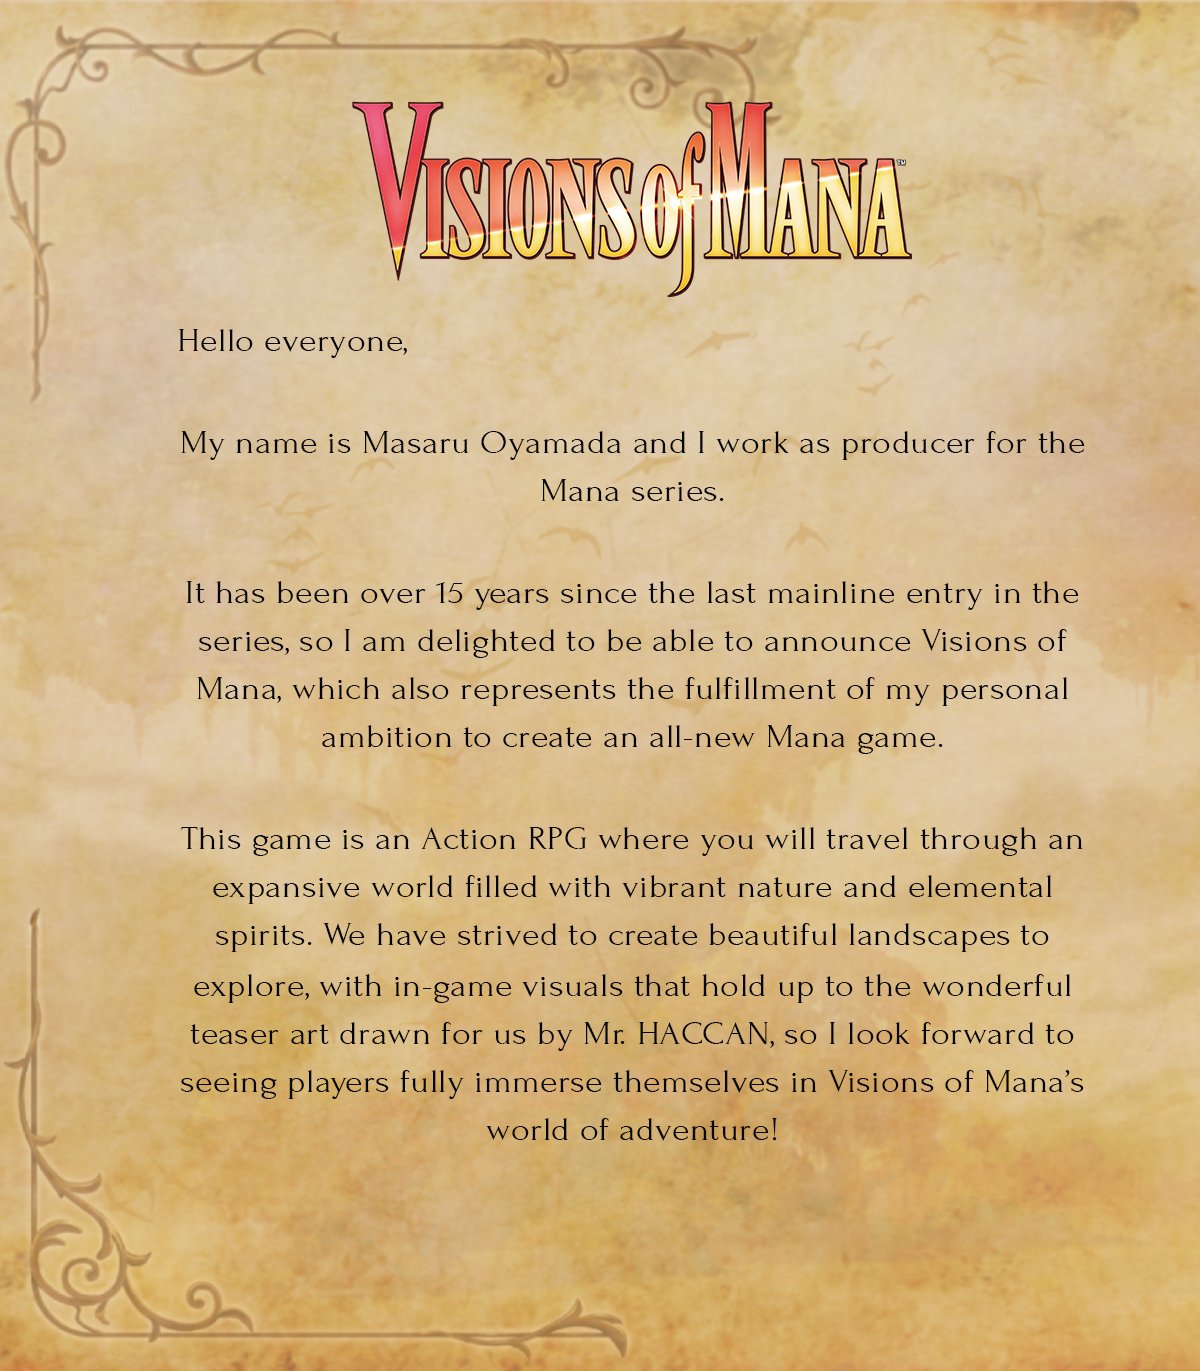 Visions of Mana Producer Message part 1